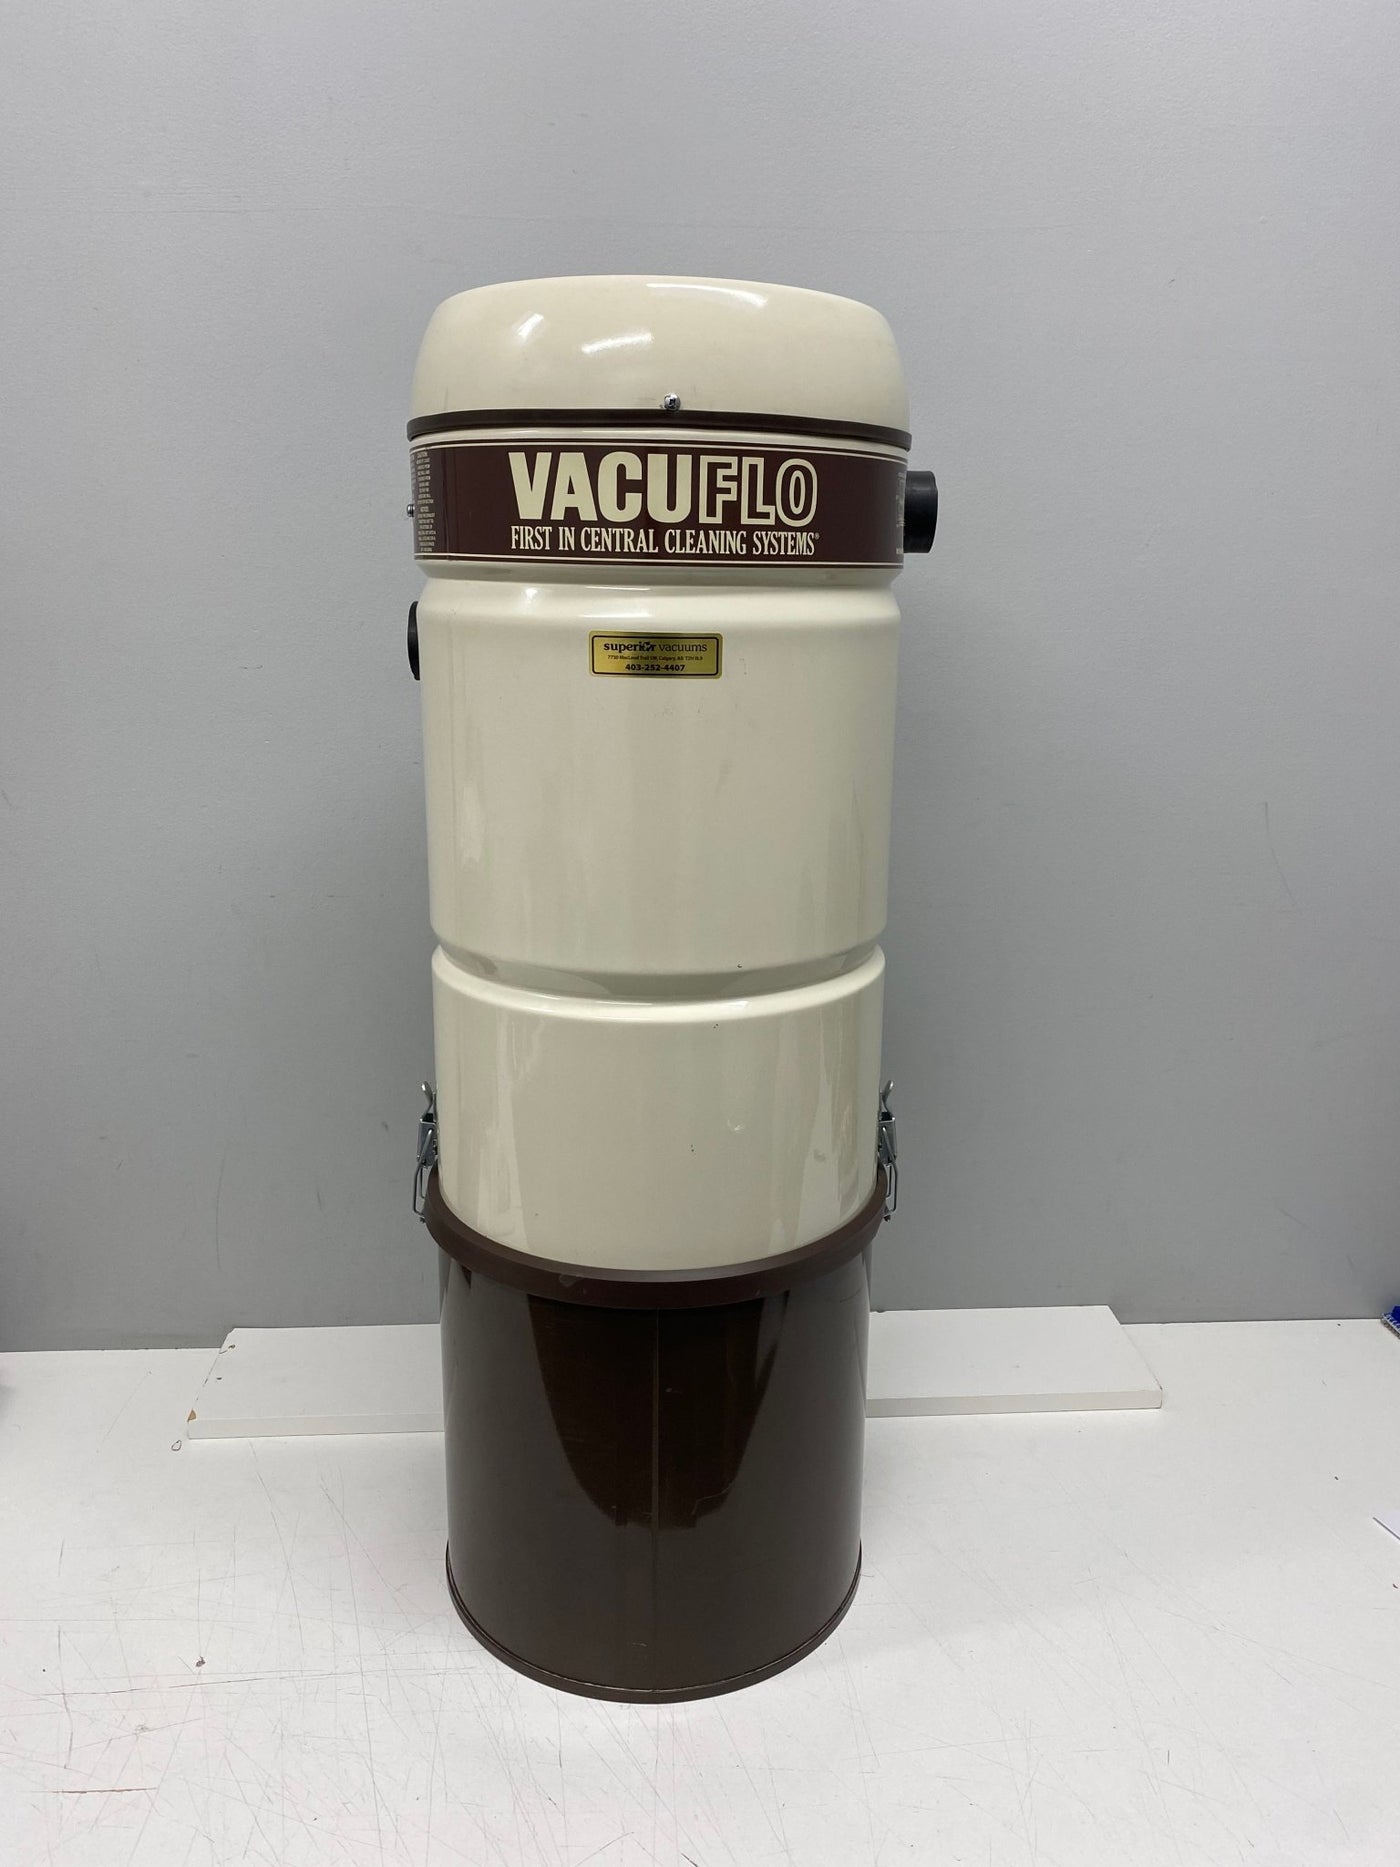 Refurbished Vacuflo 260 Central Vacuum Kit with 6-Month Warranty - Powerful Home Cleaning Solution